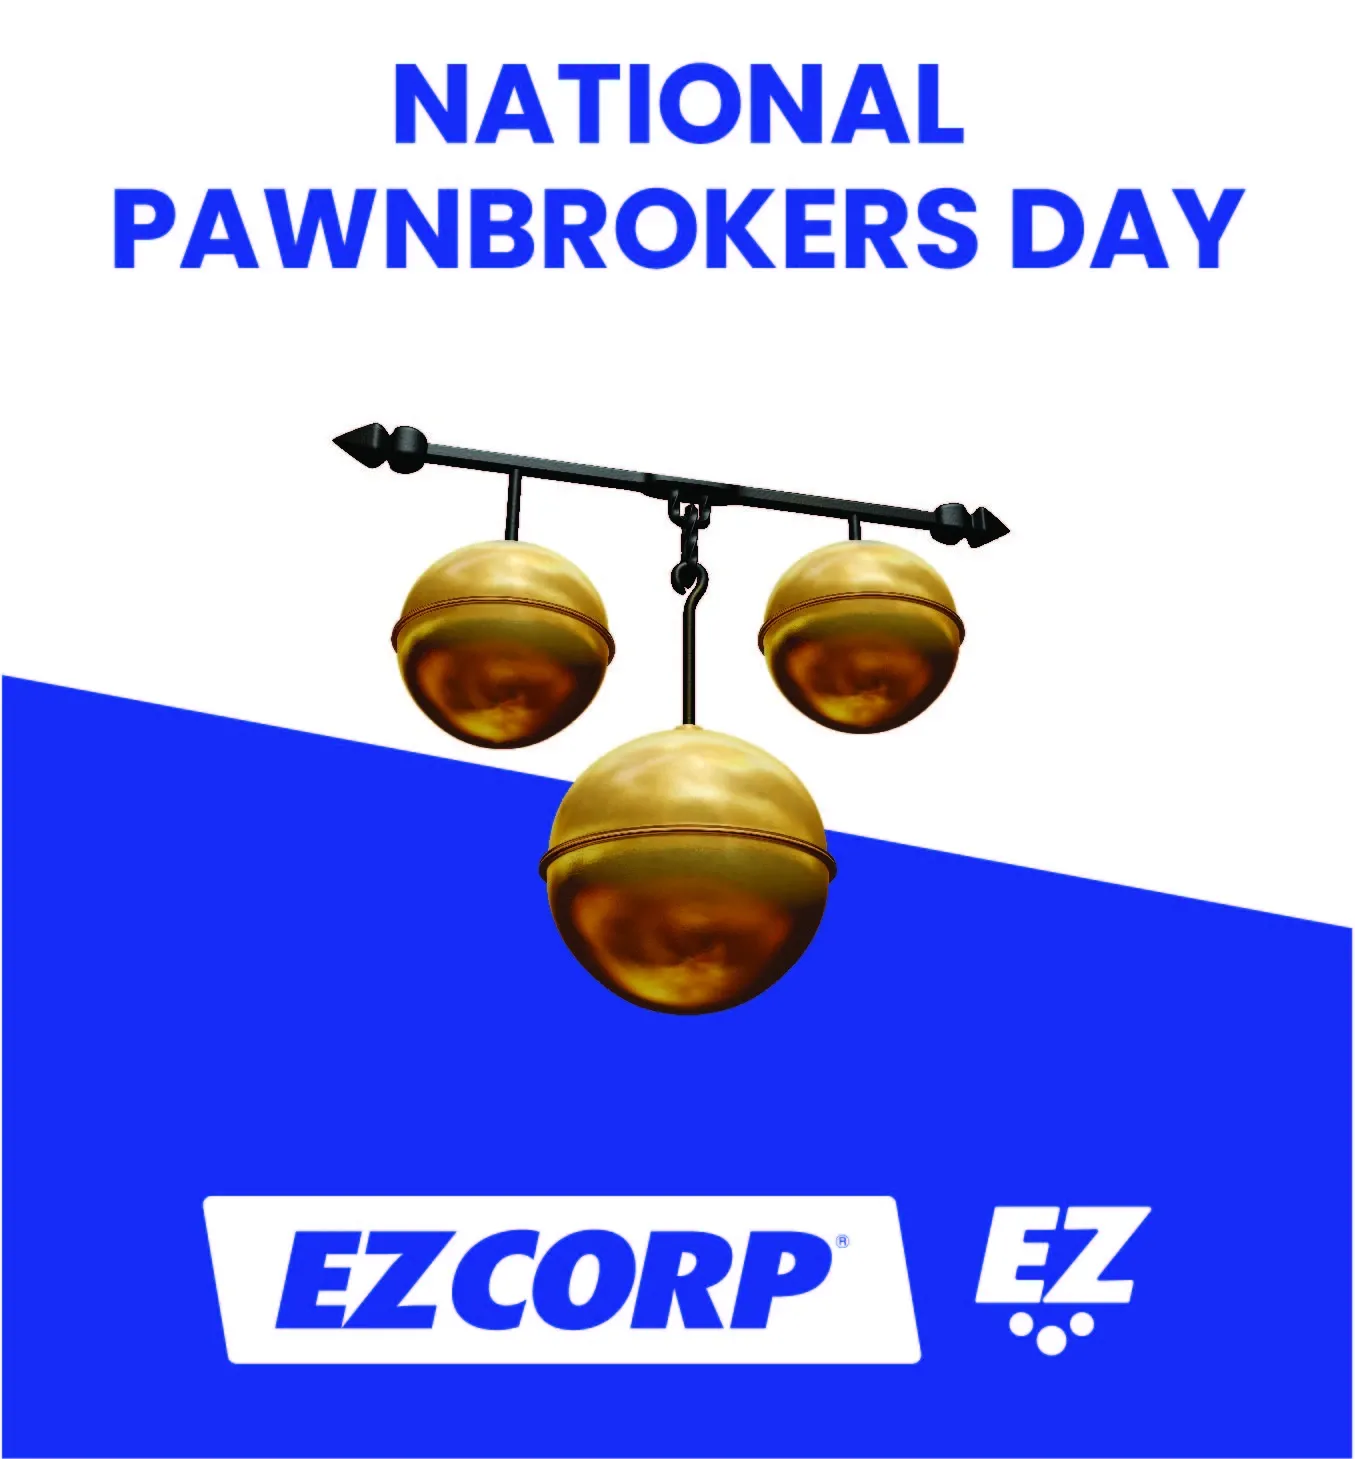 A graphic image of the traditional pawn symbol, which is three gold balls suspended from a bar. The graphic includes writing “National Pawnbrokers Day,” and “EZ”.